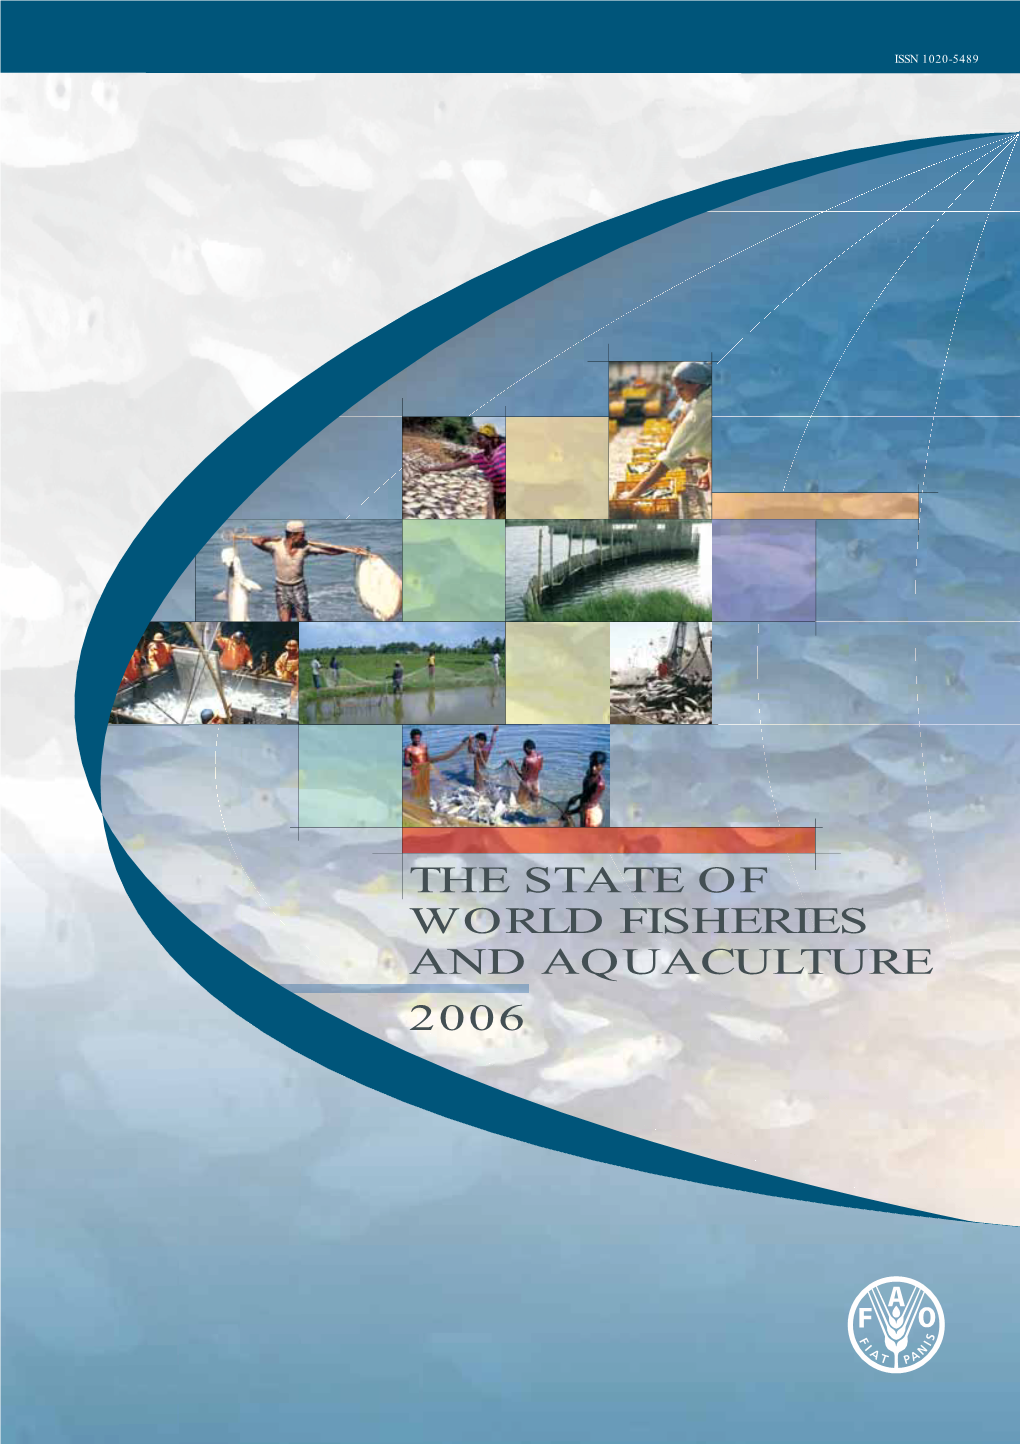 The State of World Fisheries and Aquaculture 2006